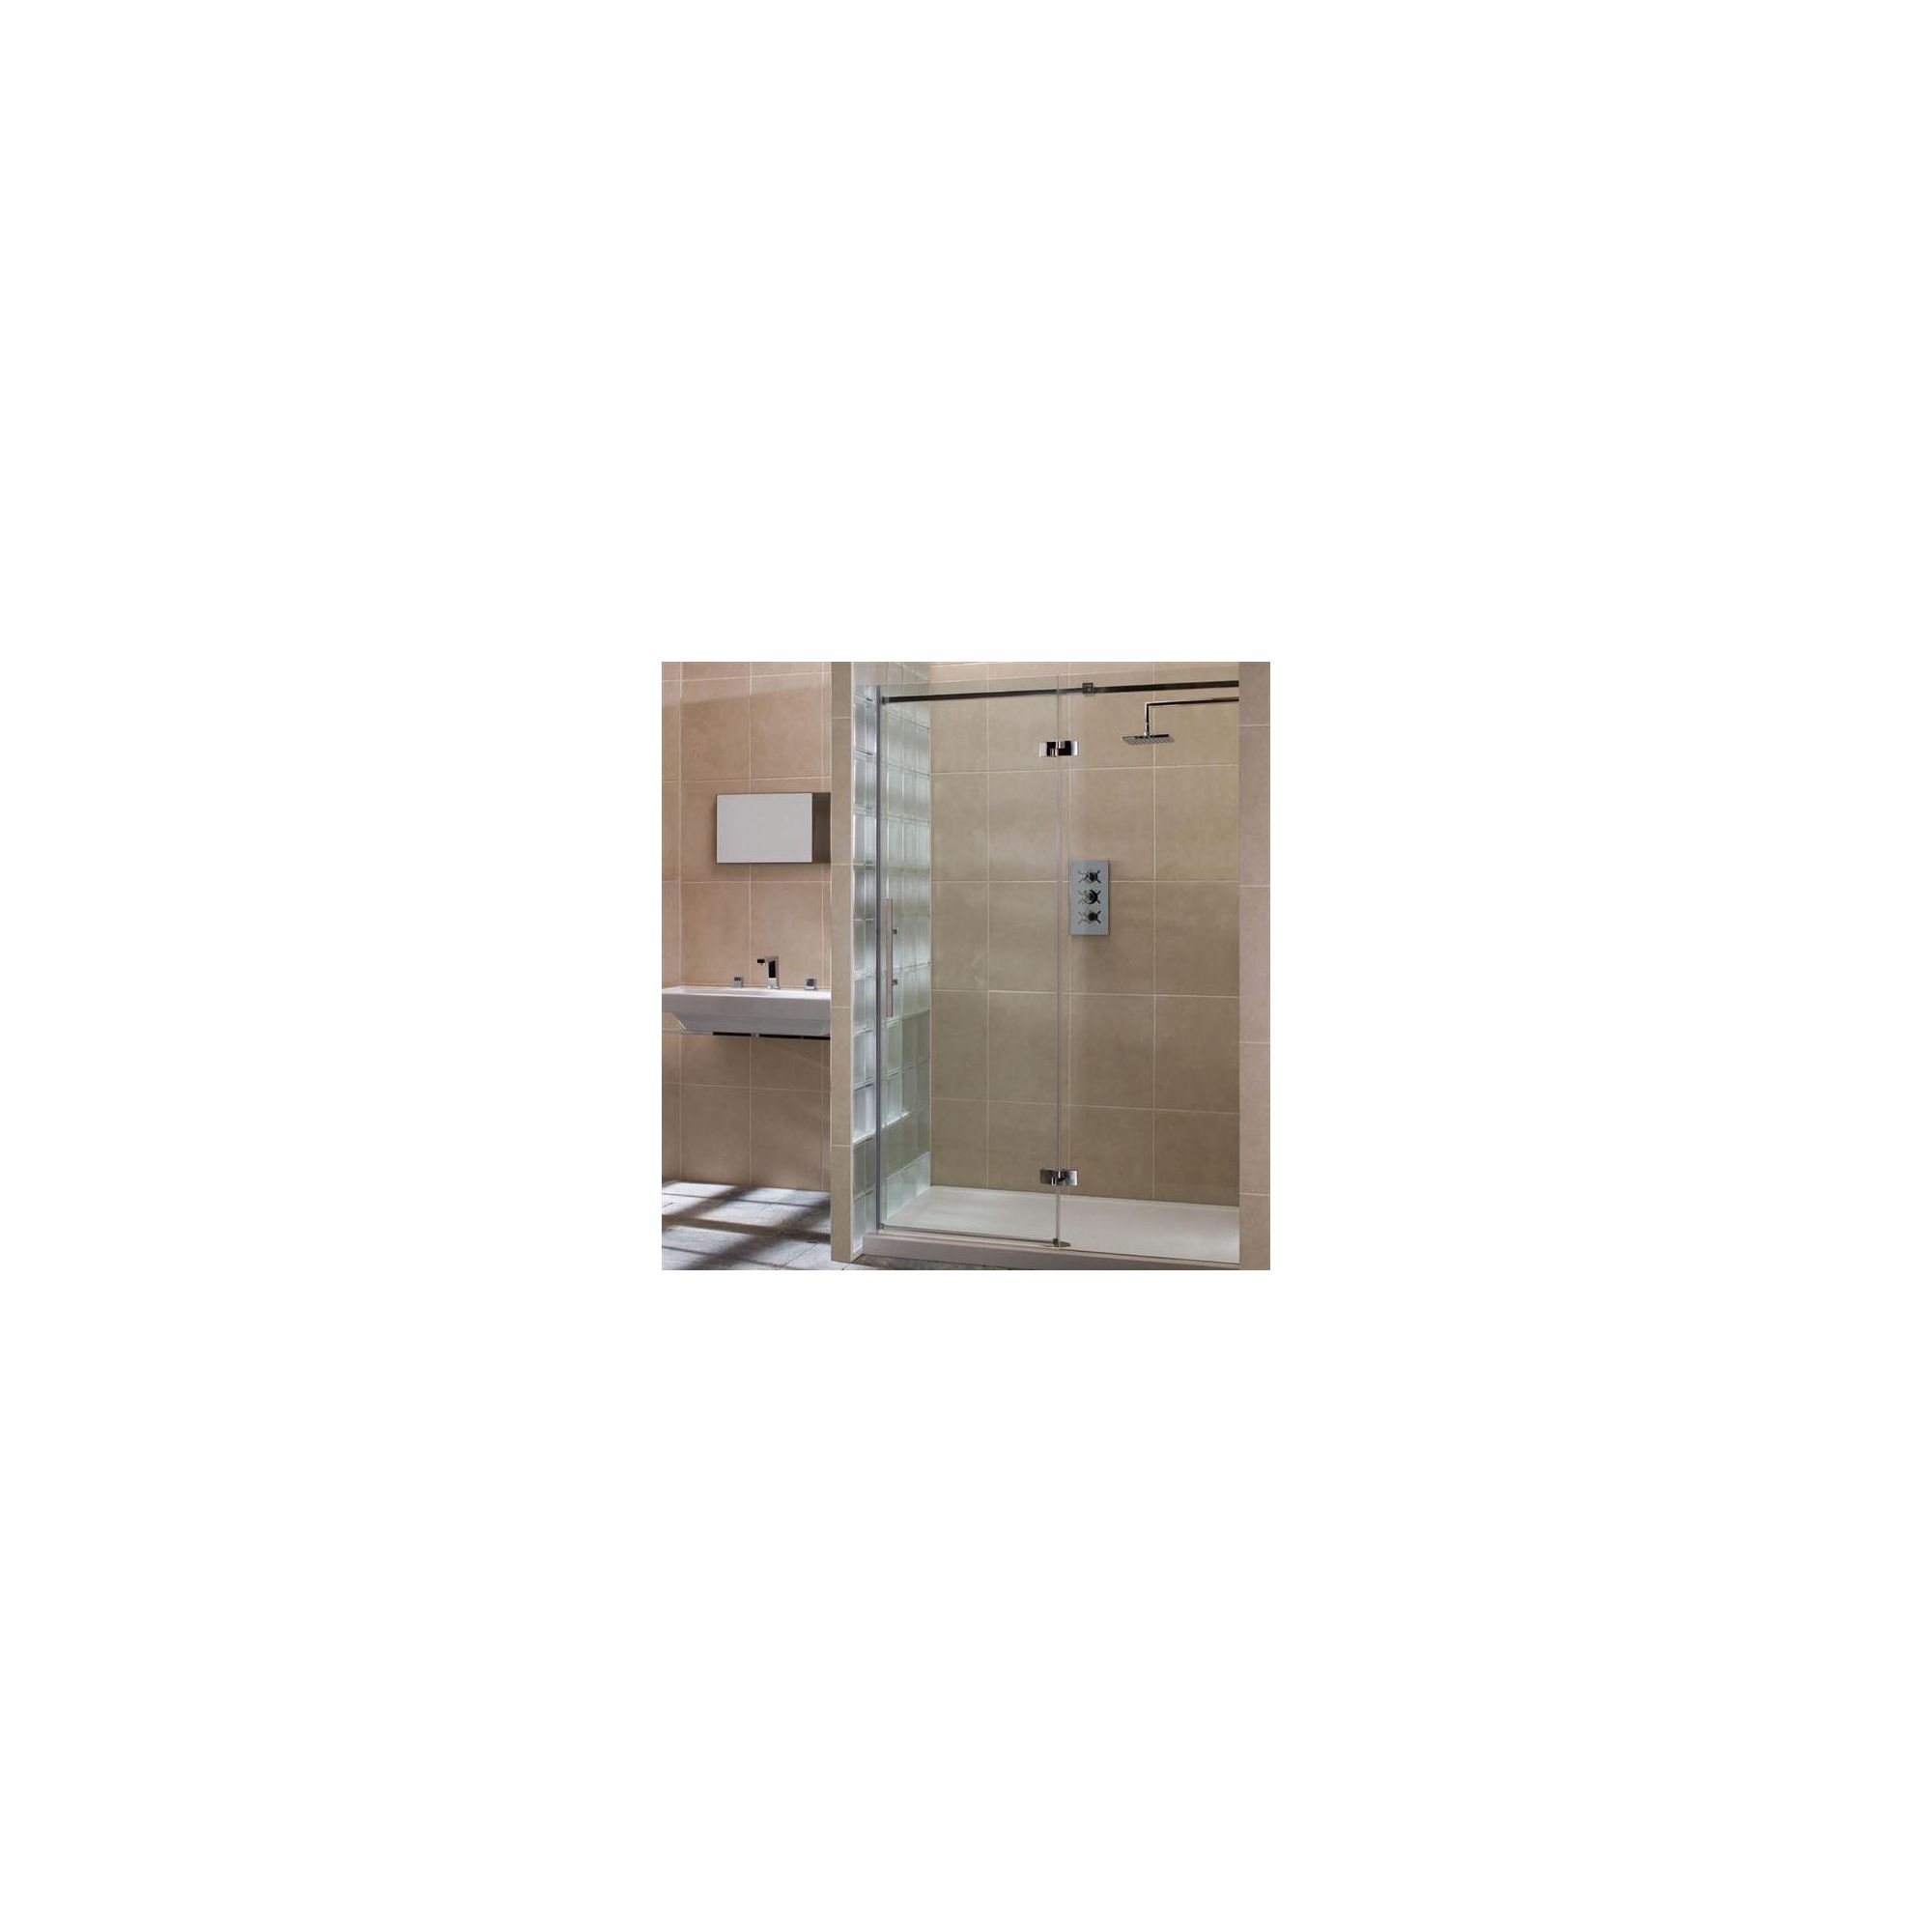 Merlyn Vivid Nine Hinged Door Alcove Shower Enclosure with Inline Panel, 1200mm x 800mm, Right Handed, Low Profile Tray, 8mm Glass at Tesco Direct